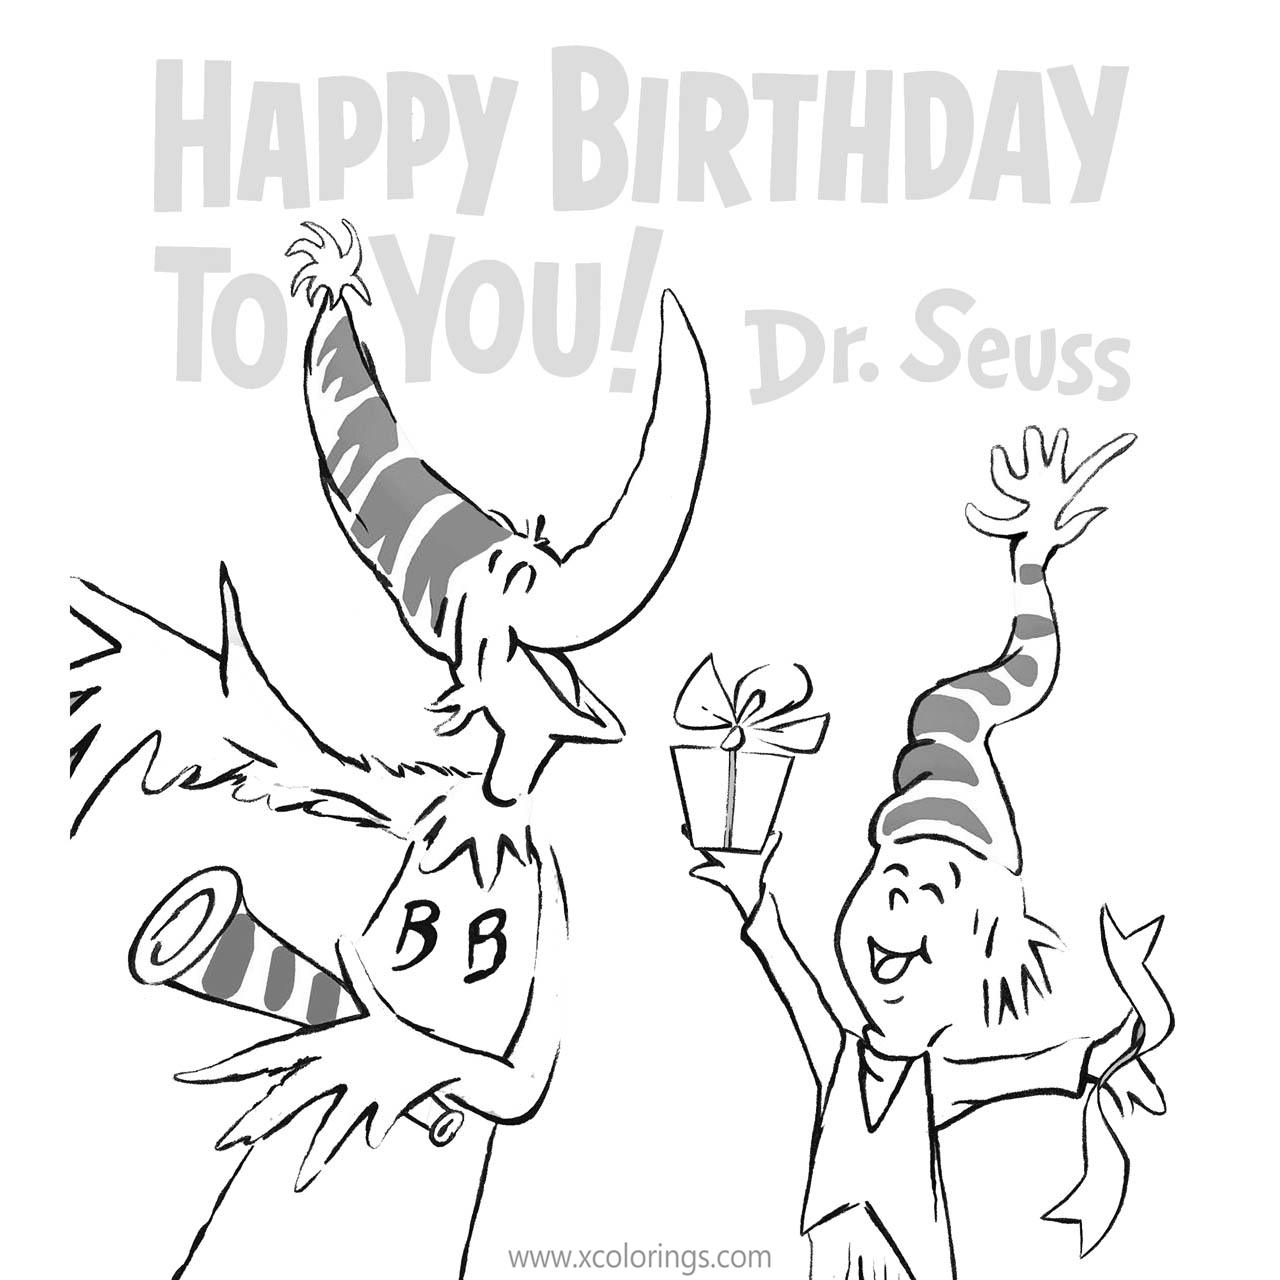 Free Happy Birthday To You Dr Seuss Coloring Pages printable